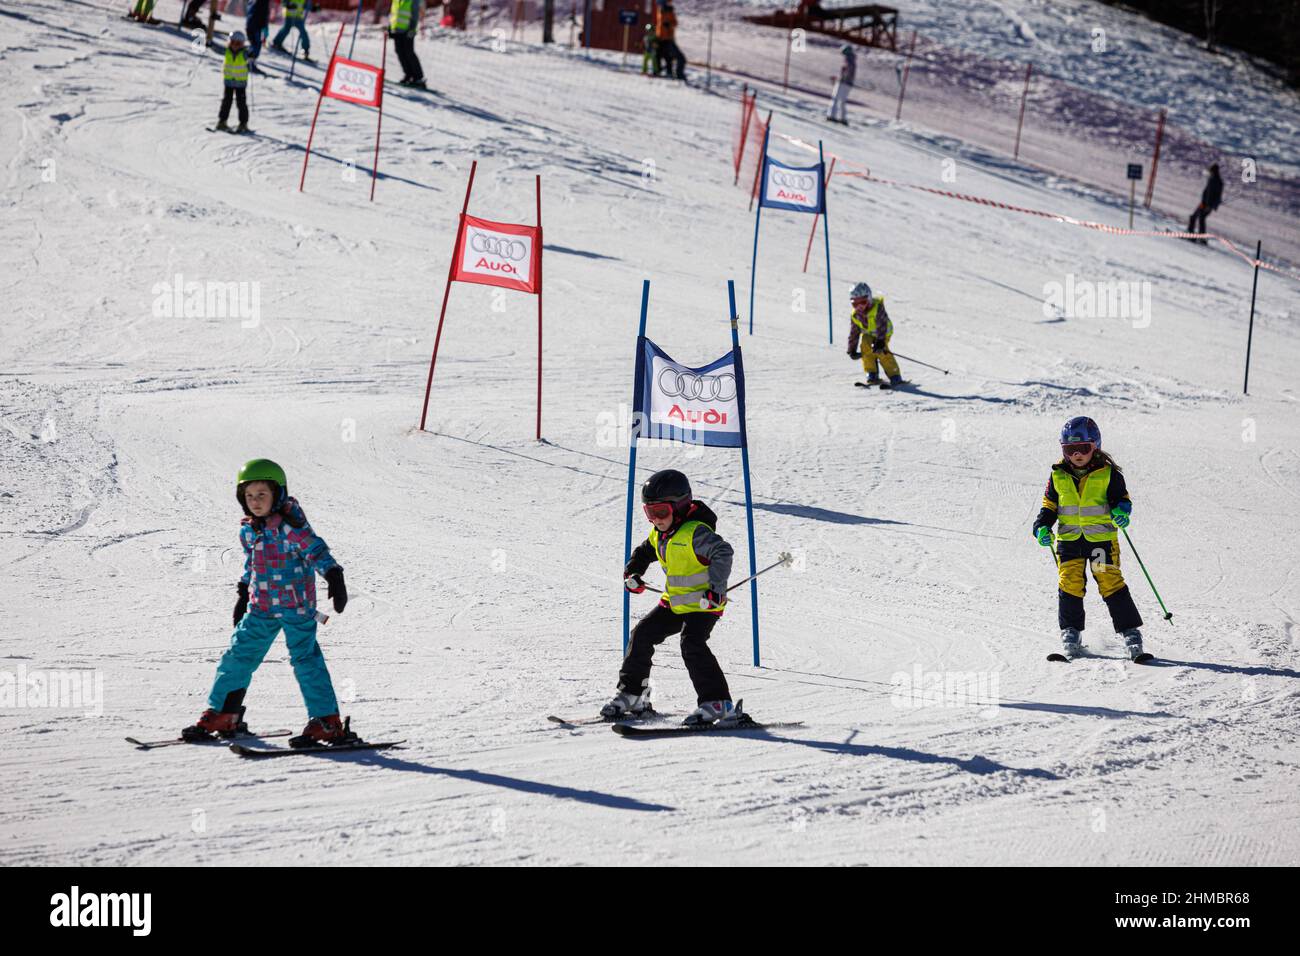 Children learn how to ski during an event celebrating the 50th anniversary of Apollo 15 astronauts skiing at the Zatrnik ski resort in Slovenia. The crew of Apollo 15 visited Slovenia, then part of Yugoslavia, in 1972 on their European tour. Half a century ago Commander David R. Scott, Command Module Pilot Alfred M. Worden and Lunar Module Pilot James B. Irwin of the NASA's Apollo 15 lunar mission visited Slovenia. Their visit included skiing at the Zatrnik ski resort. On Tuesday, February 8, a special skiing event was held to commemorate the anniversary of their visit. (Photo by Luka Dakskob Stock Photo